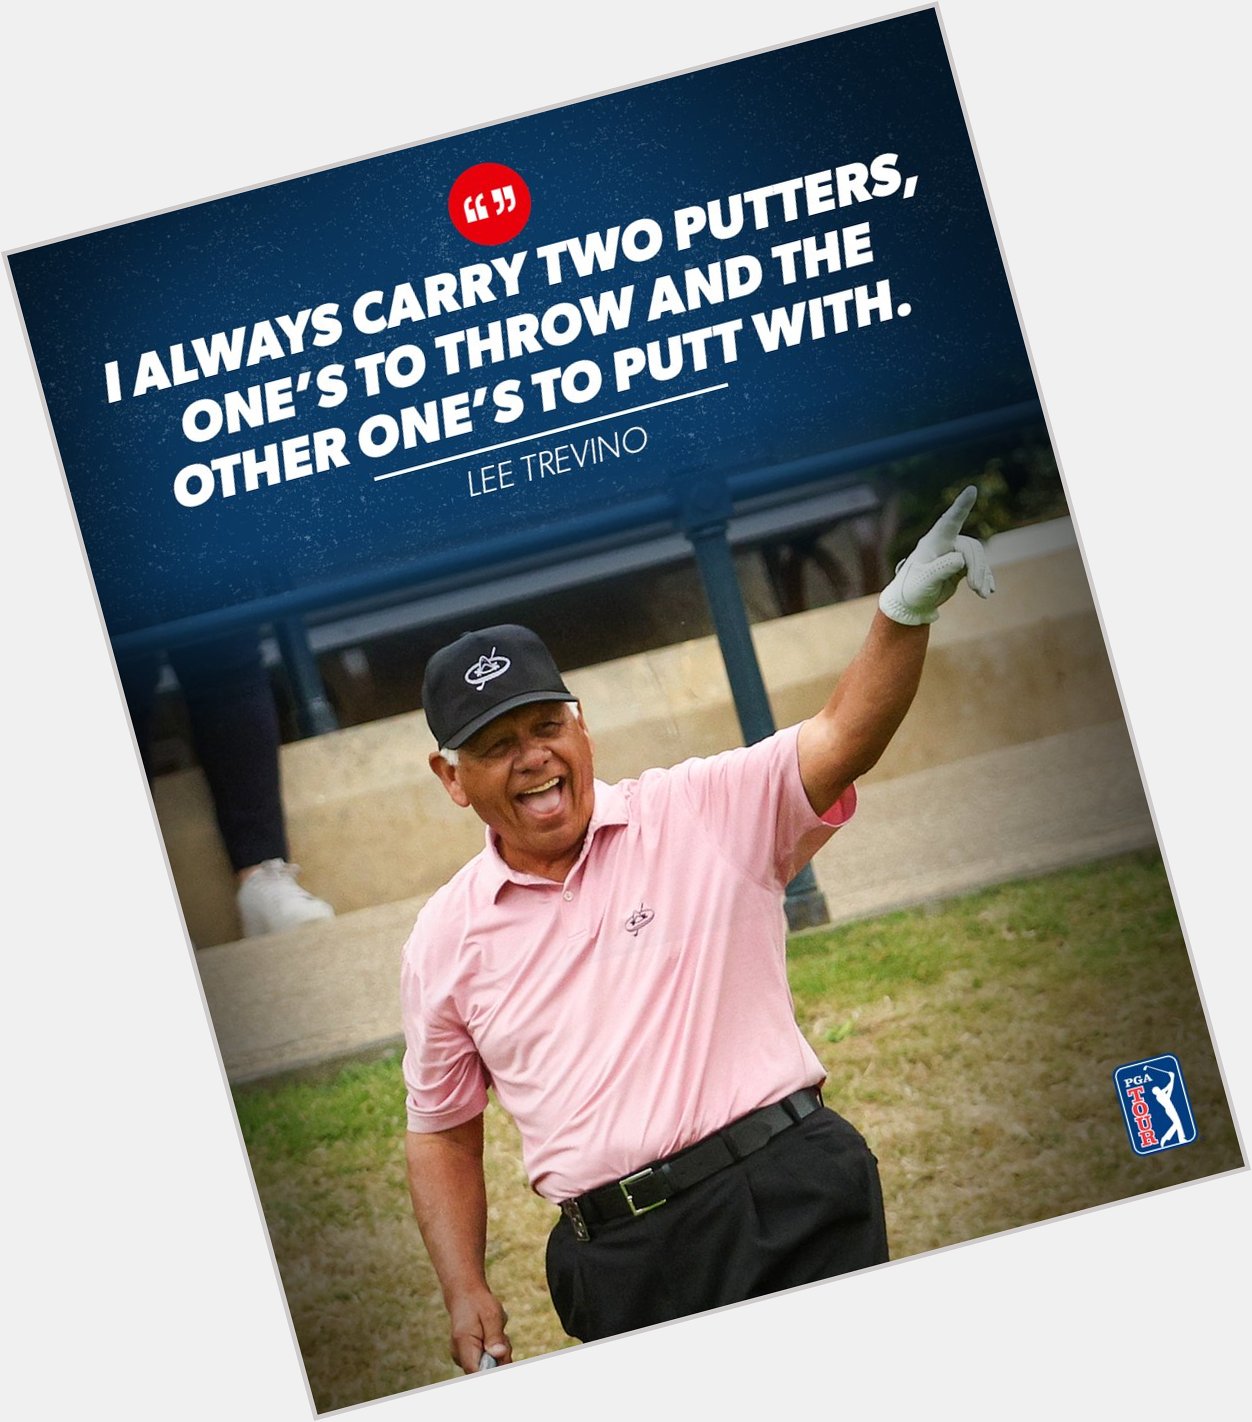 PGATOUR: The king of one-liners Happy 83rd birthday Lee Trevino! 